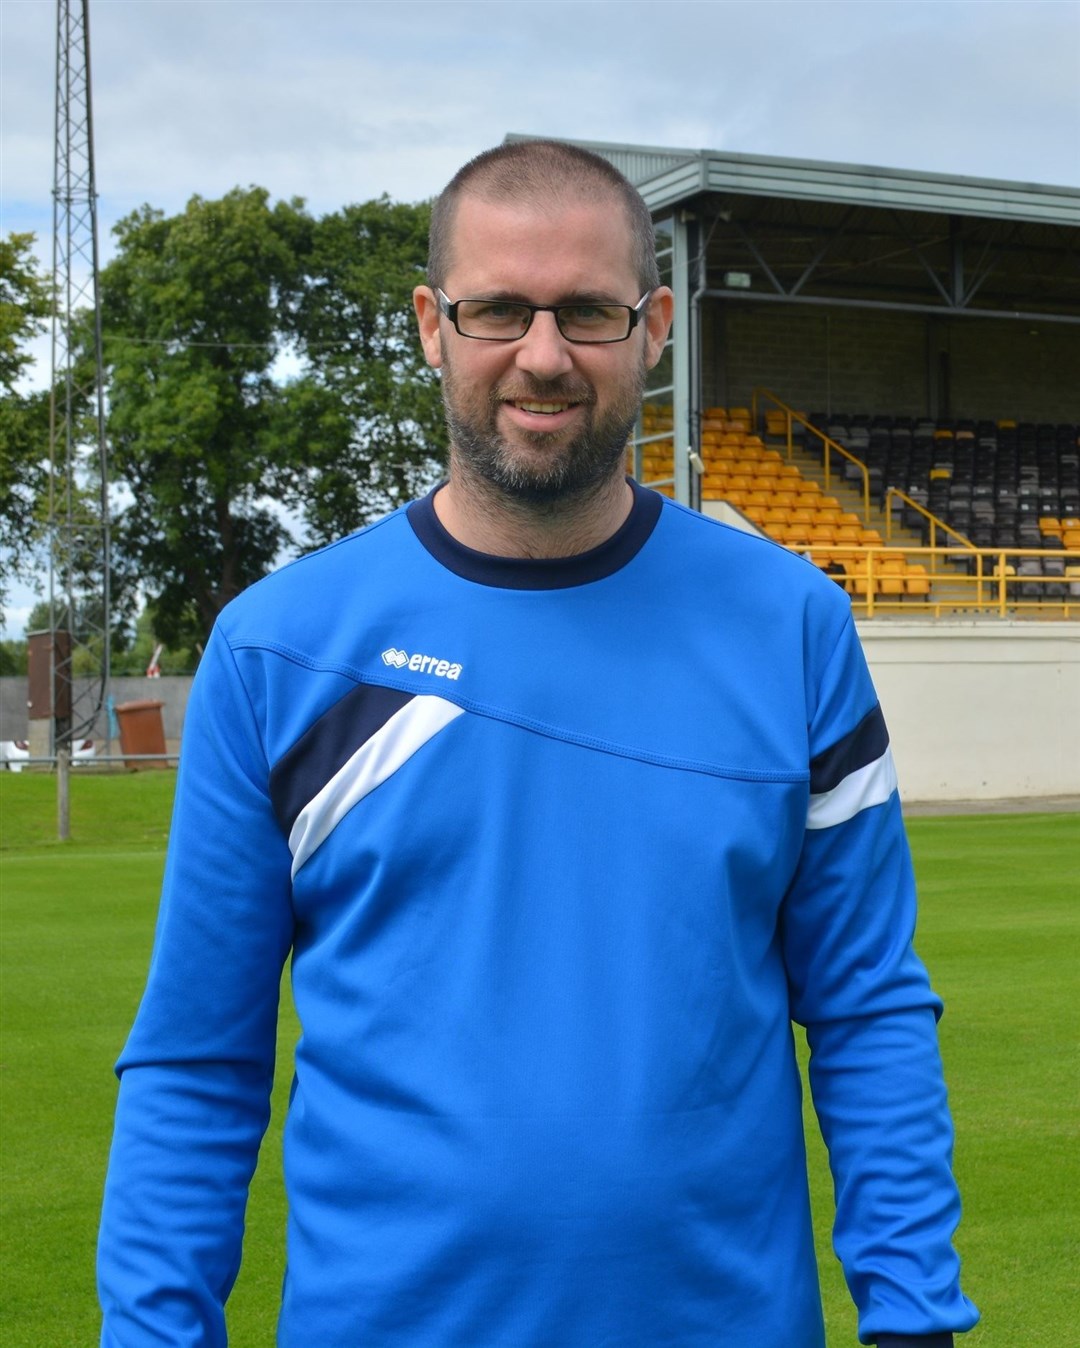 New Keith boss Craig Ewen spent more than five years as assistant manager at Forres Mechanics.